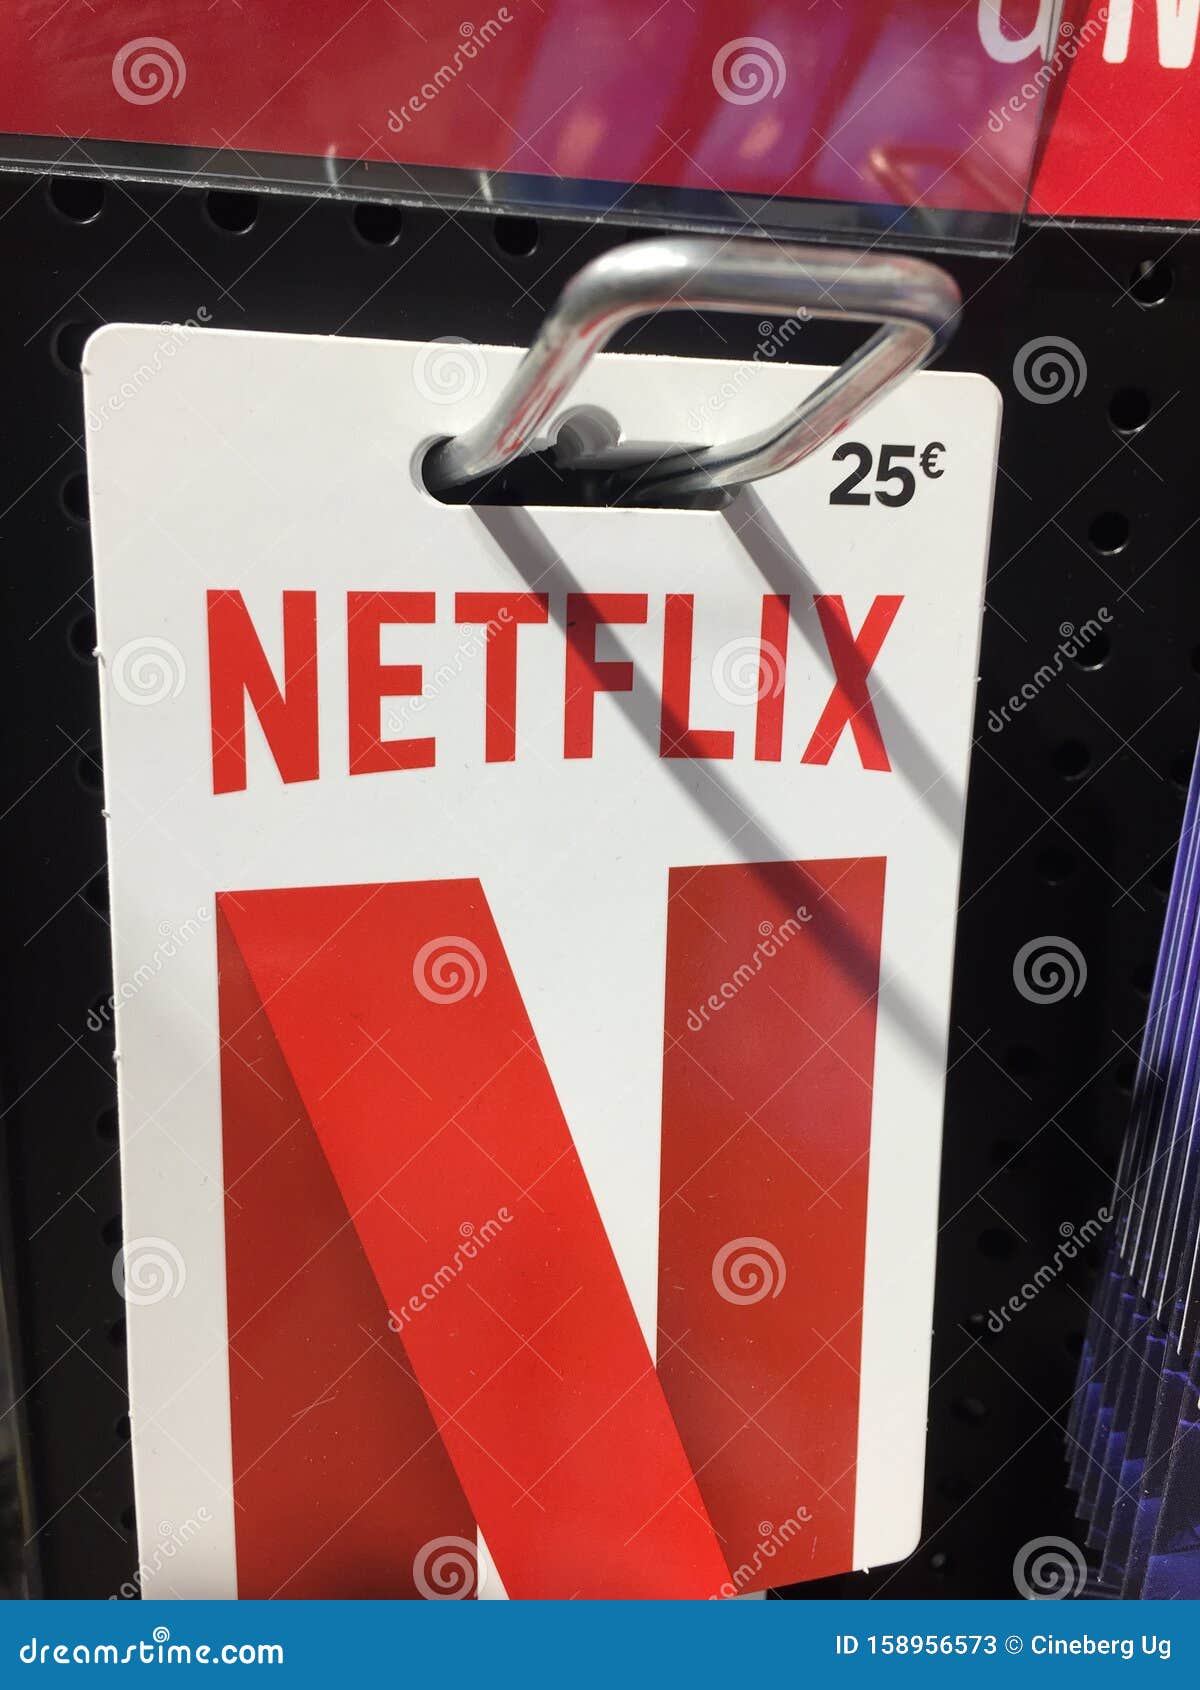 Netflix 4K Ultra HD Shared personal account Available at the best price  Single Screen  Rs300 Full Account  Rs 1500 30 Days Full  Instagram